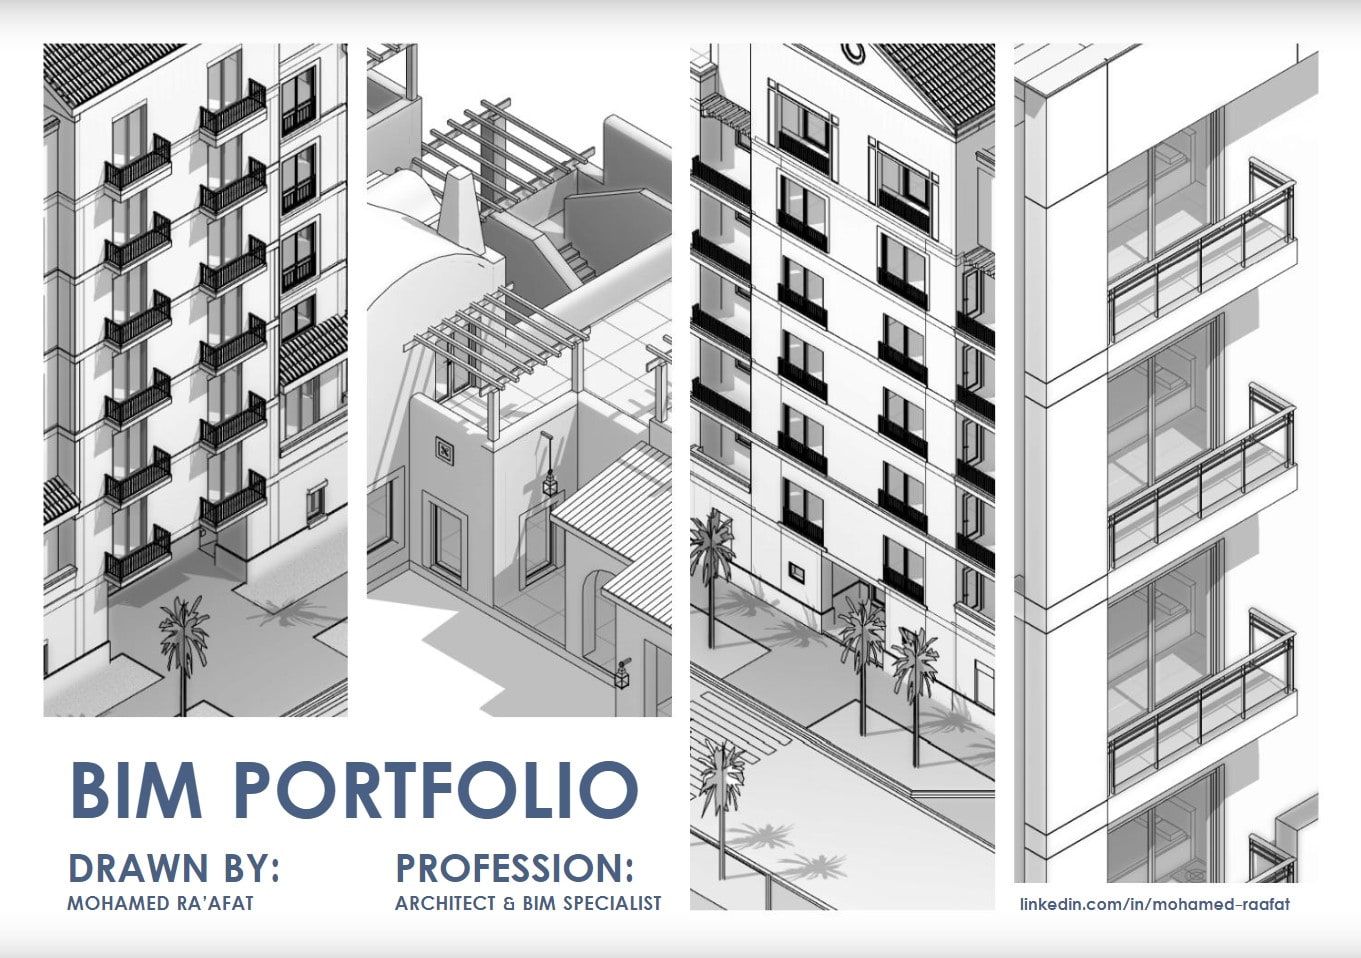 A cover page of BIM portfolio by Mohamed Ra’afat with images of 3D models and details